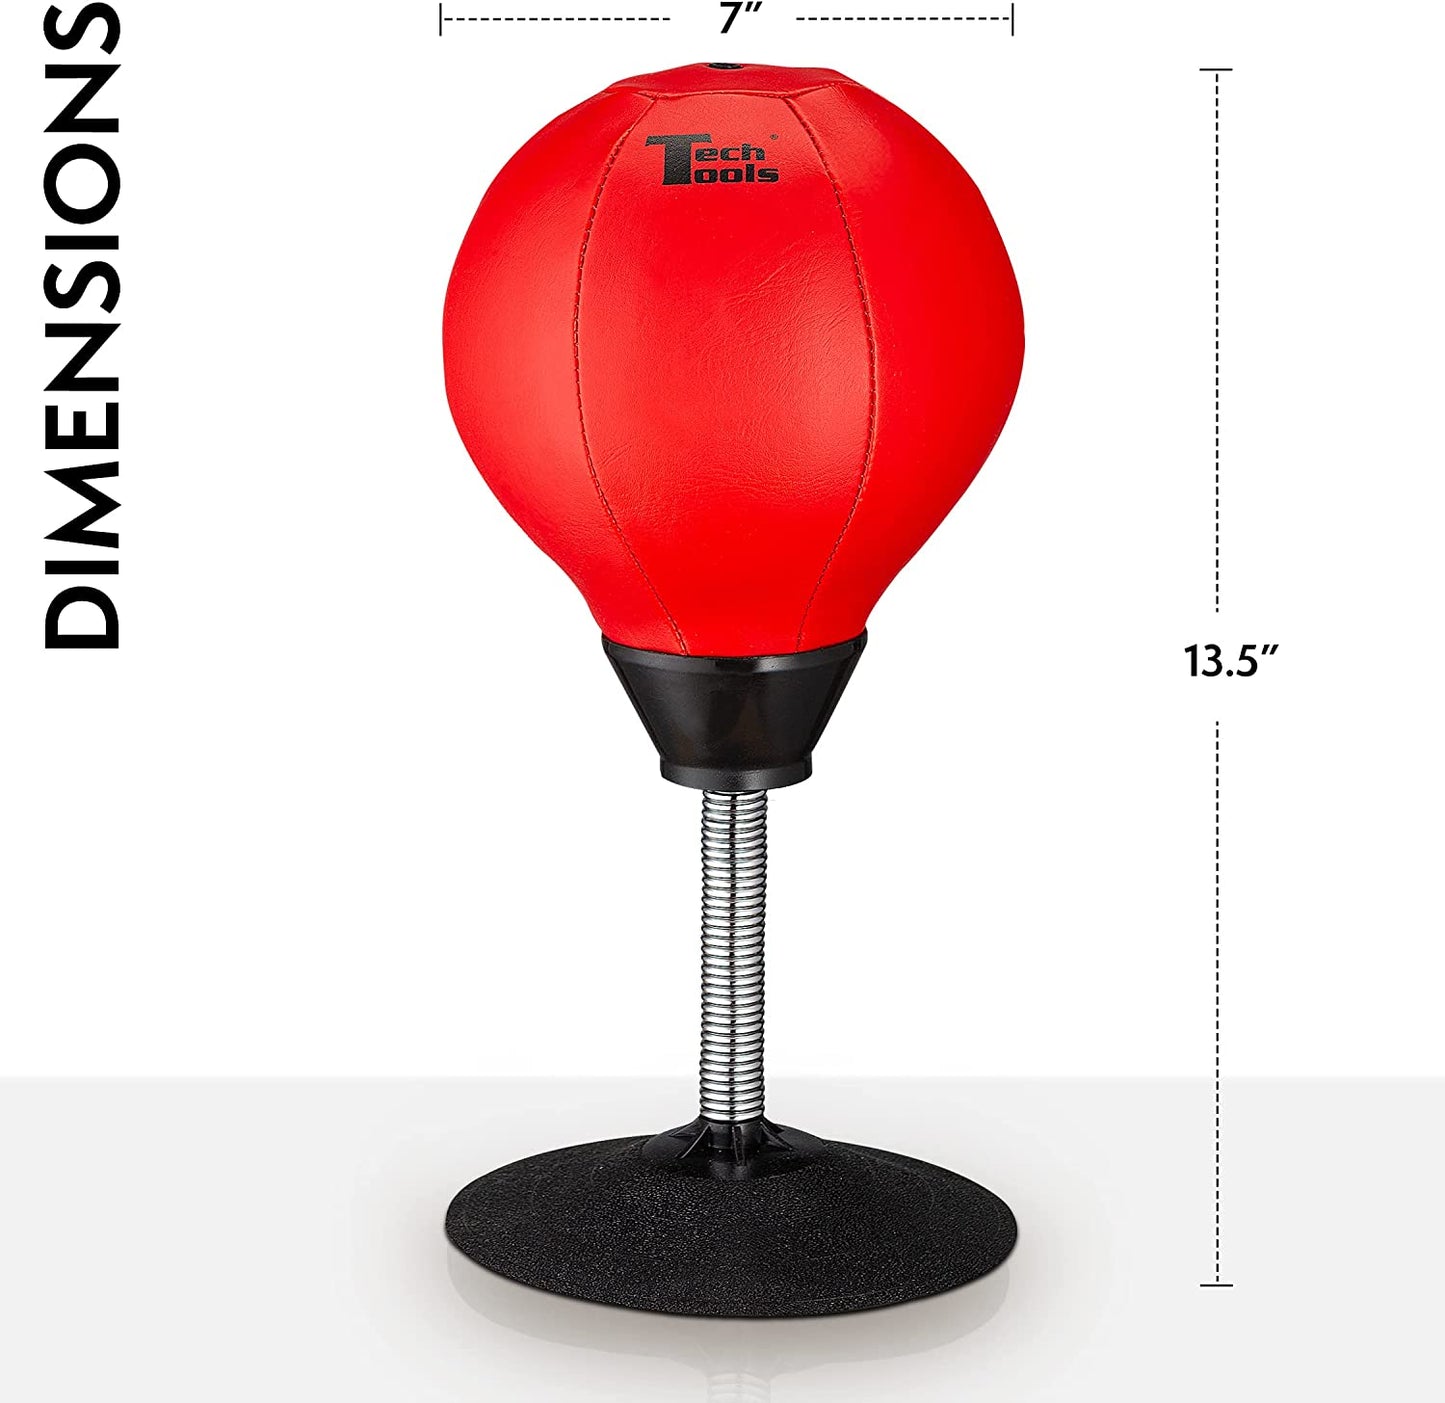 Size dimensions for a desktop punching bag. It measures 13.5 inches in height.